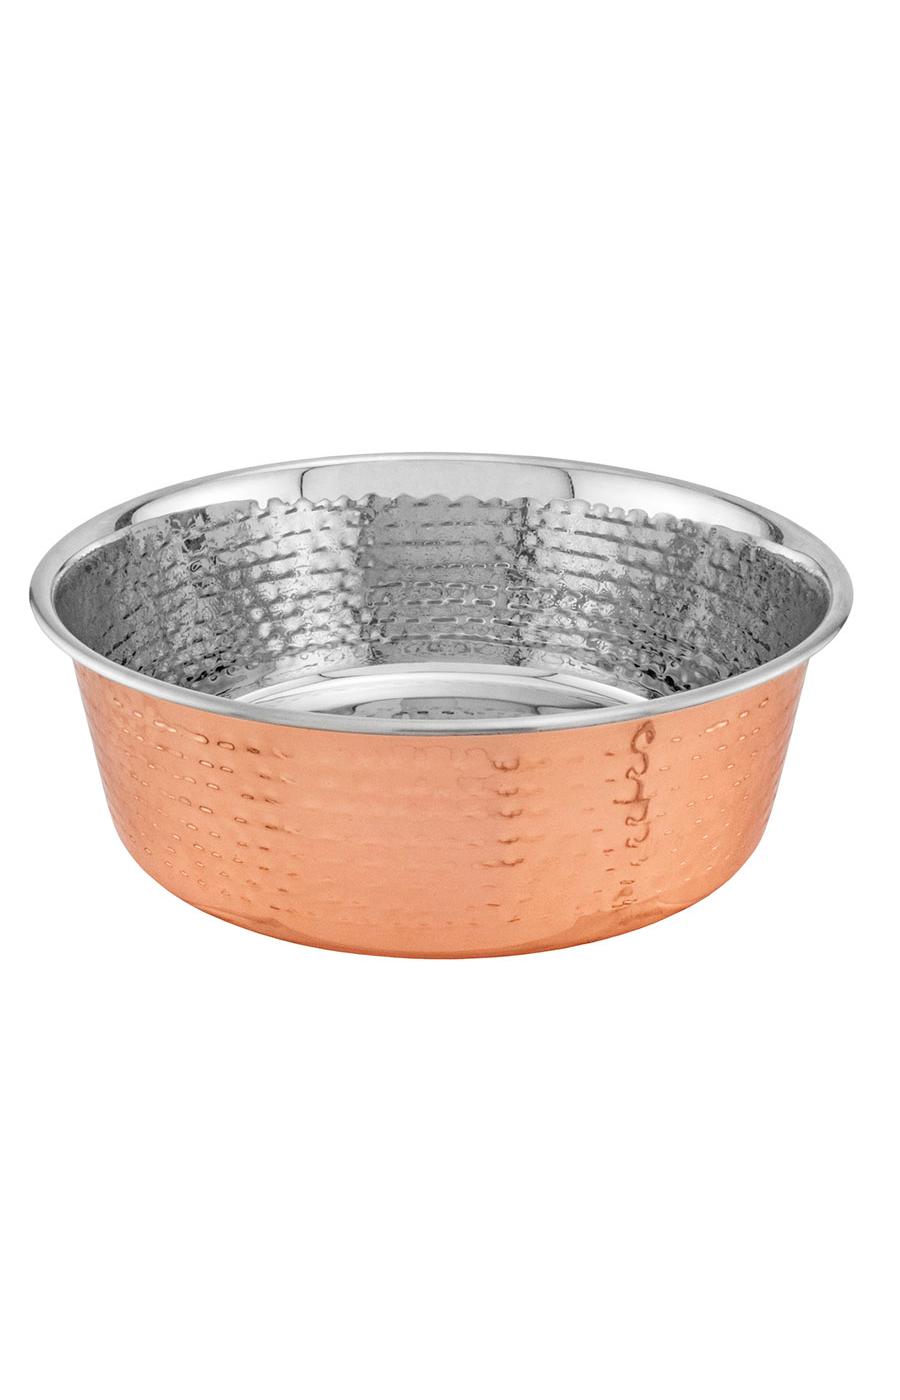 Ruffin' It 2 Quarts Copper Non-Skid Stainless Steel Pet Bowl; image 1 of 2